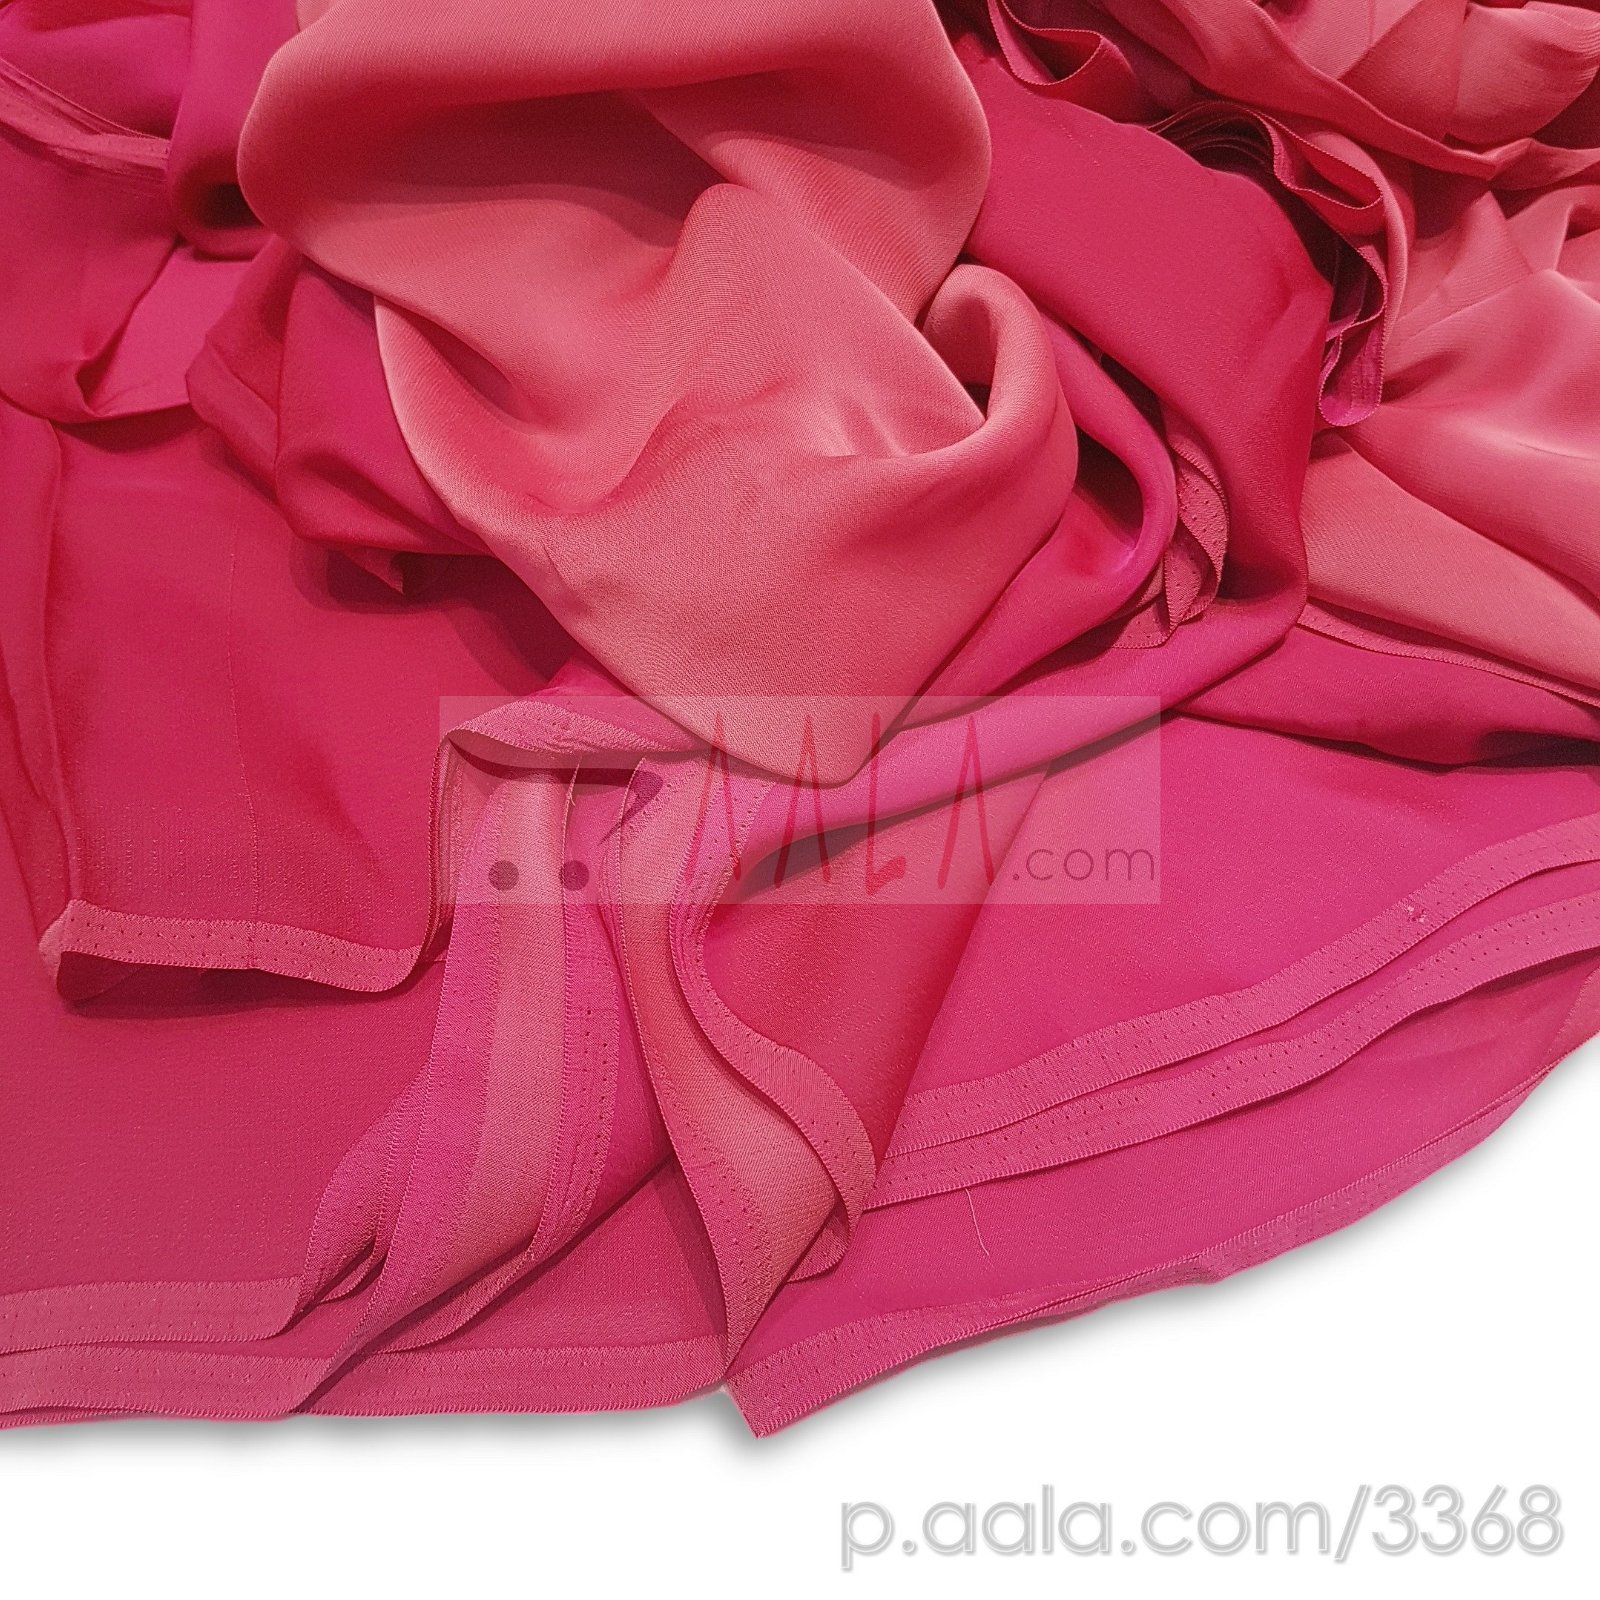 Metallic Satin Georgette Poly-ester 44 Inches Dyed Per Metre #3368